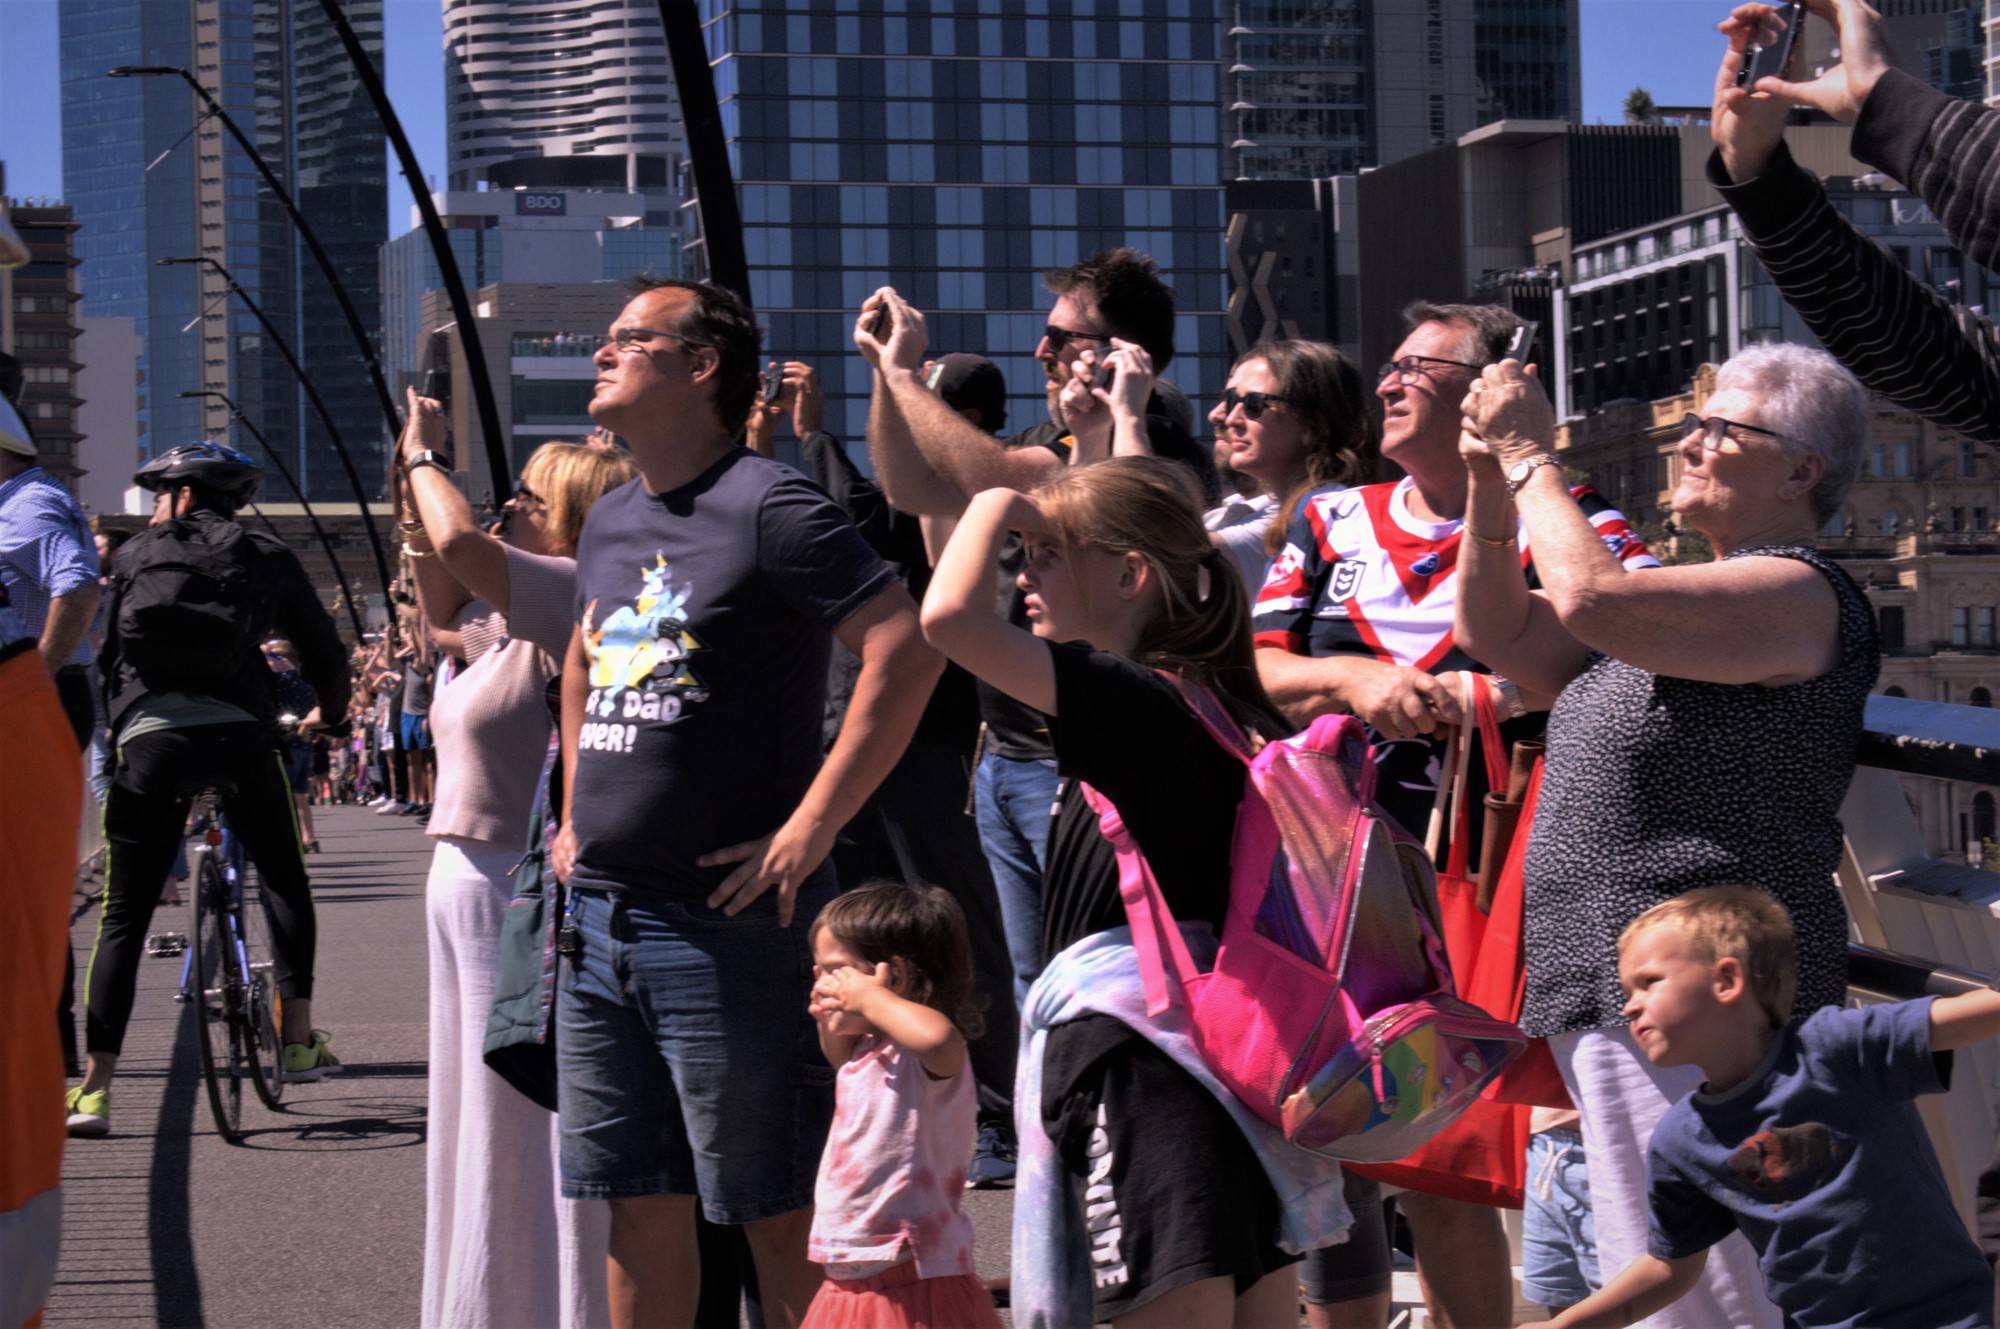 Crowds gather in Brisbane to watch the RAAF flyover.